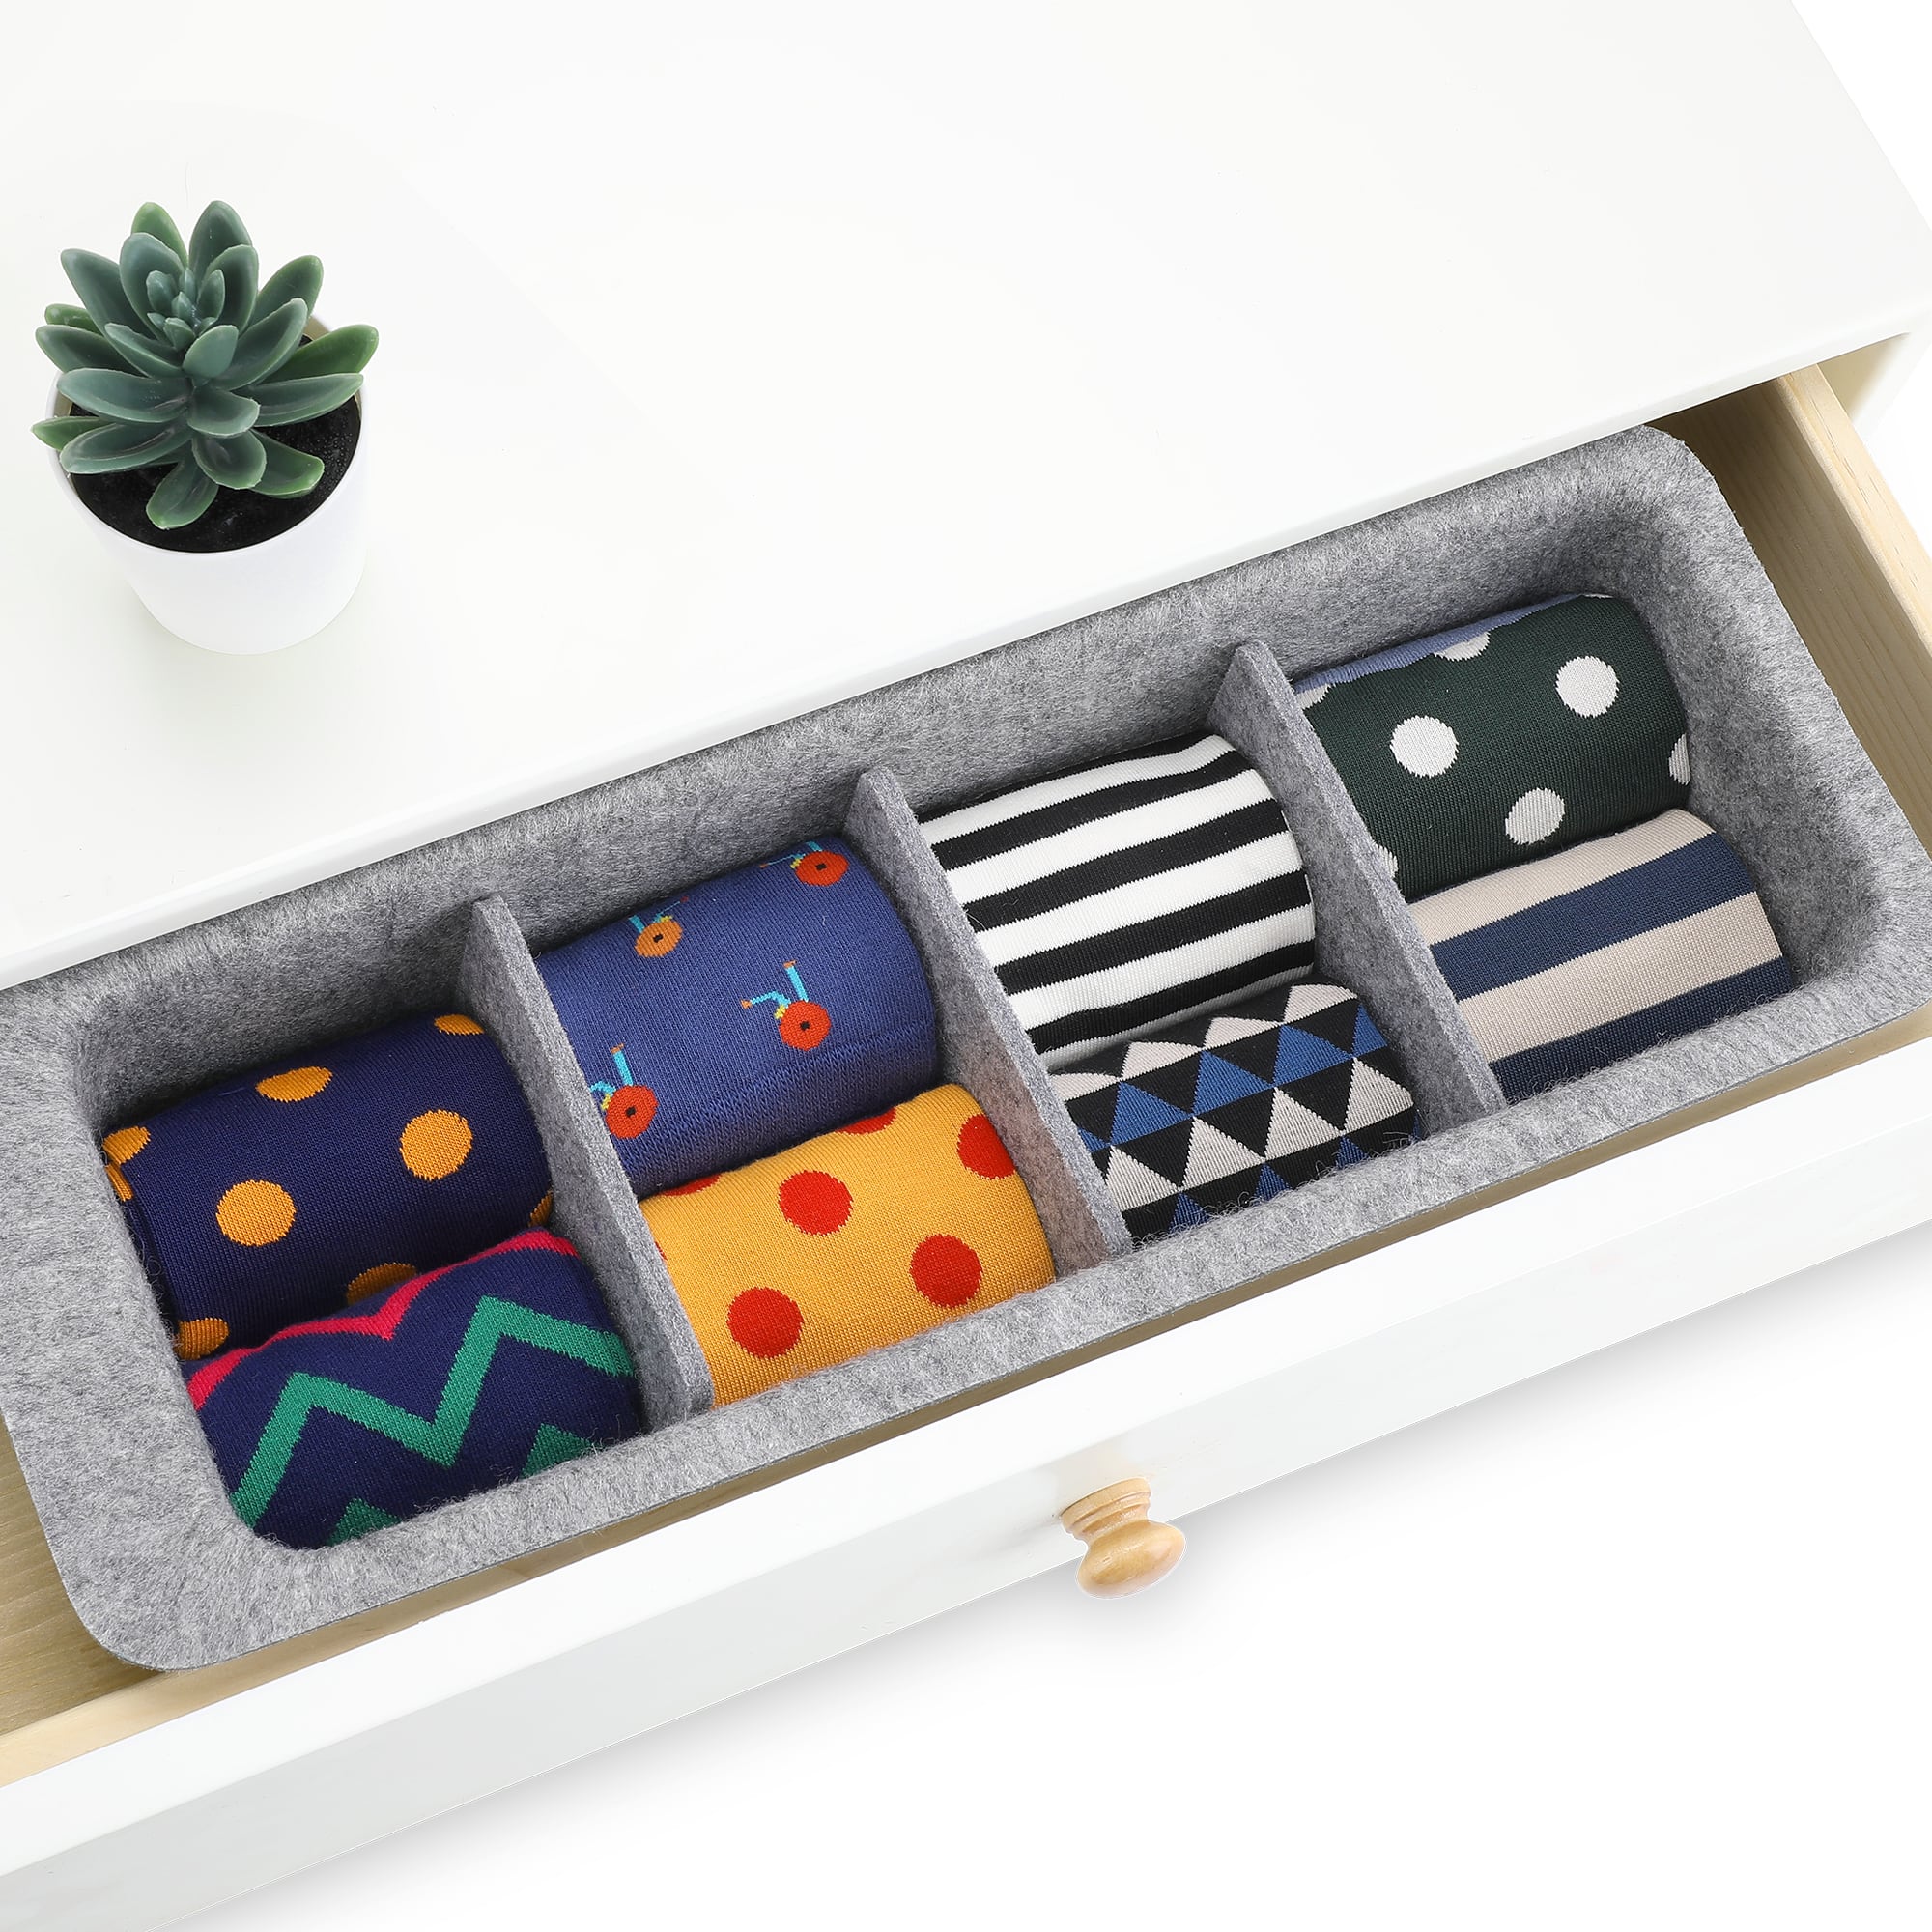 Welaxy office Drawer organizers bins Deep draw organiser Felt storage bin  drawers Desk draw dividers boxes for toys makeup jewelery rolled ties